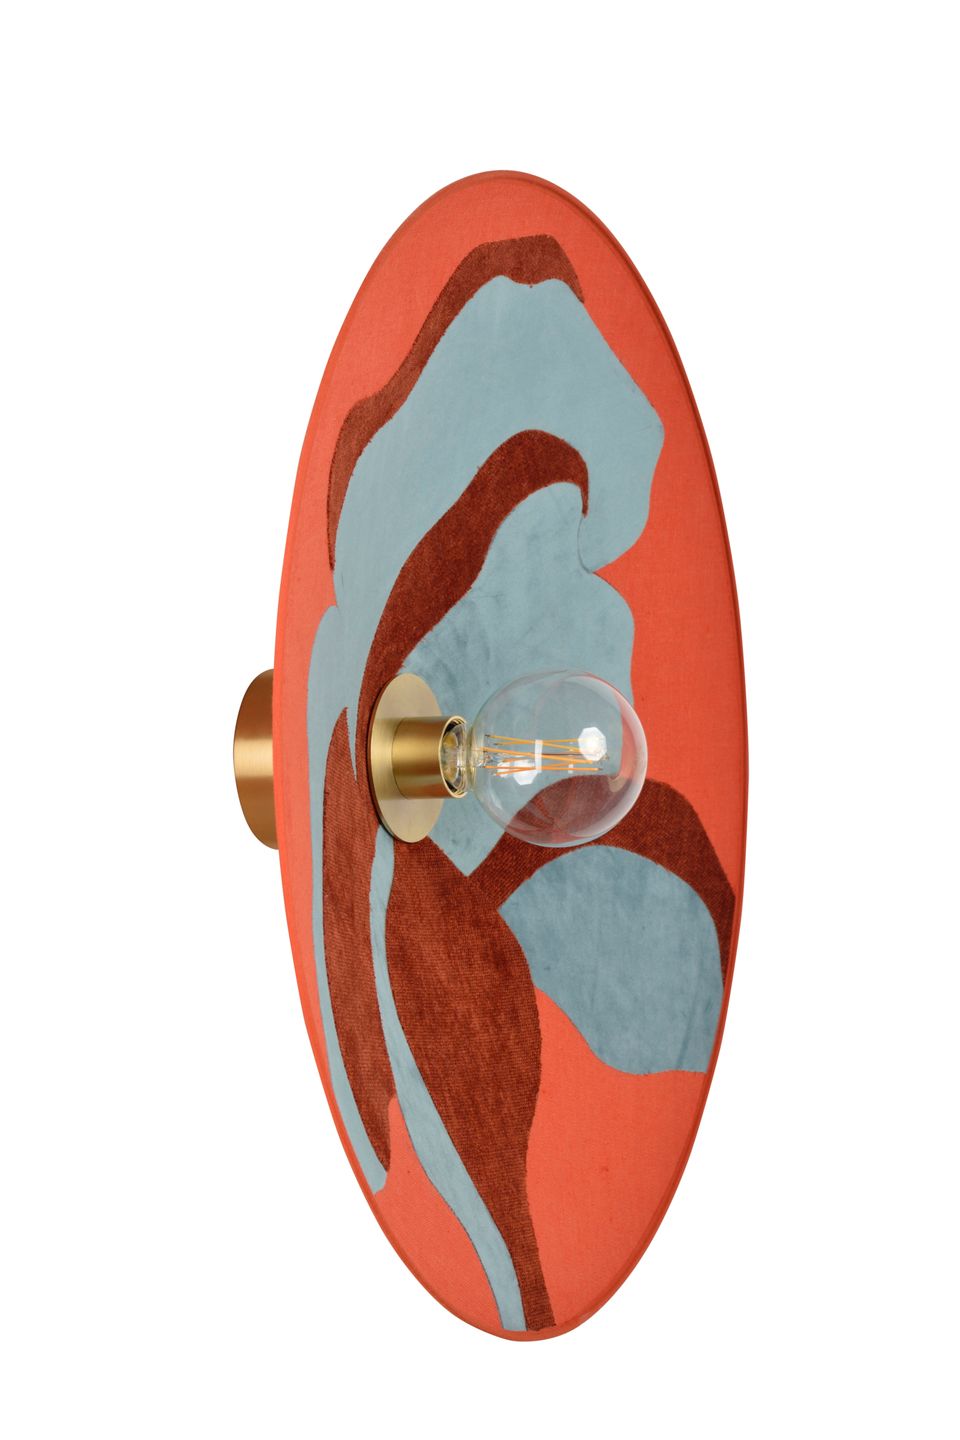 Wall lamp (Sconce) SONIA LAUDET by Market Set